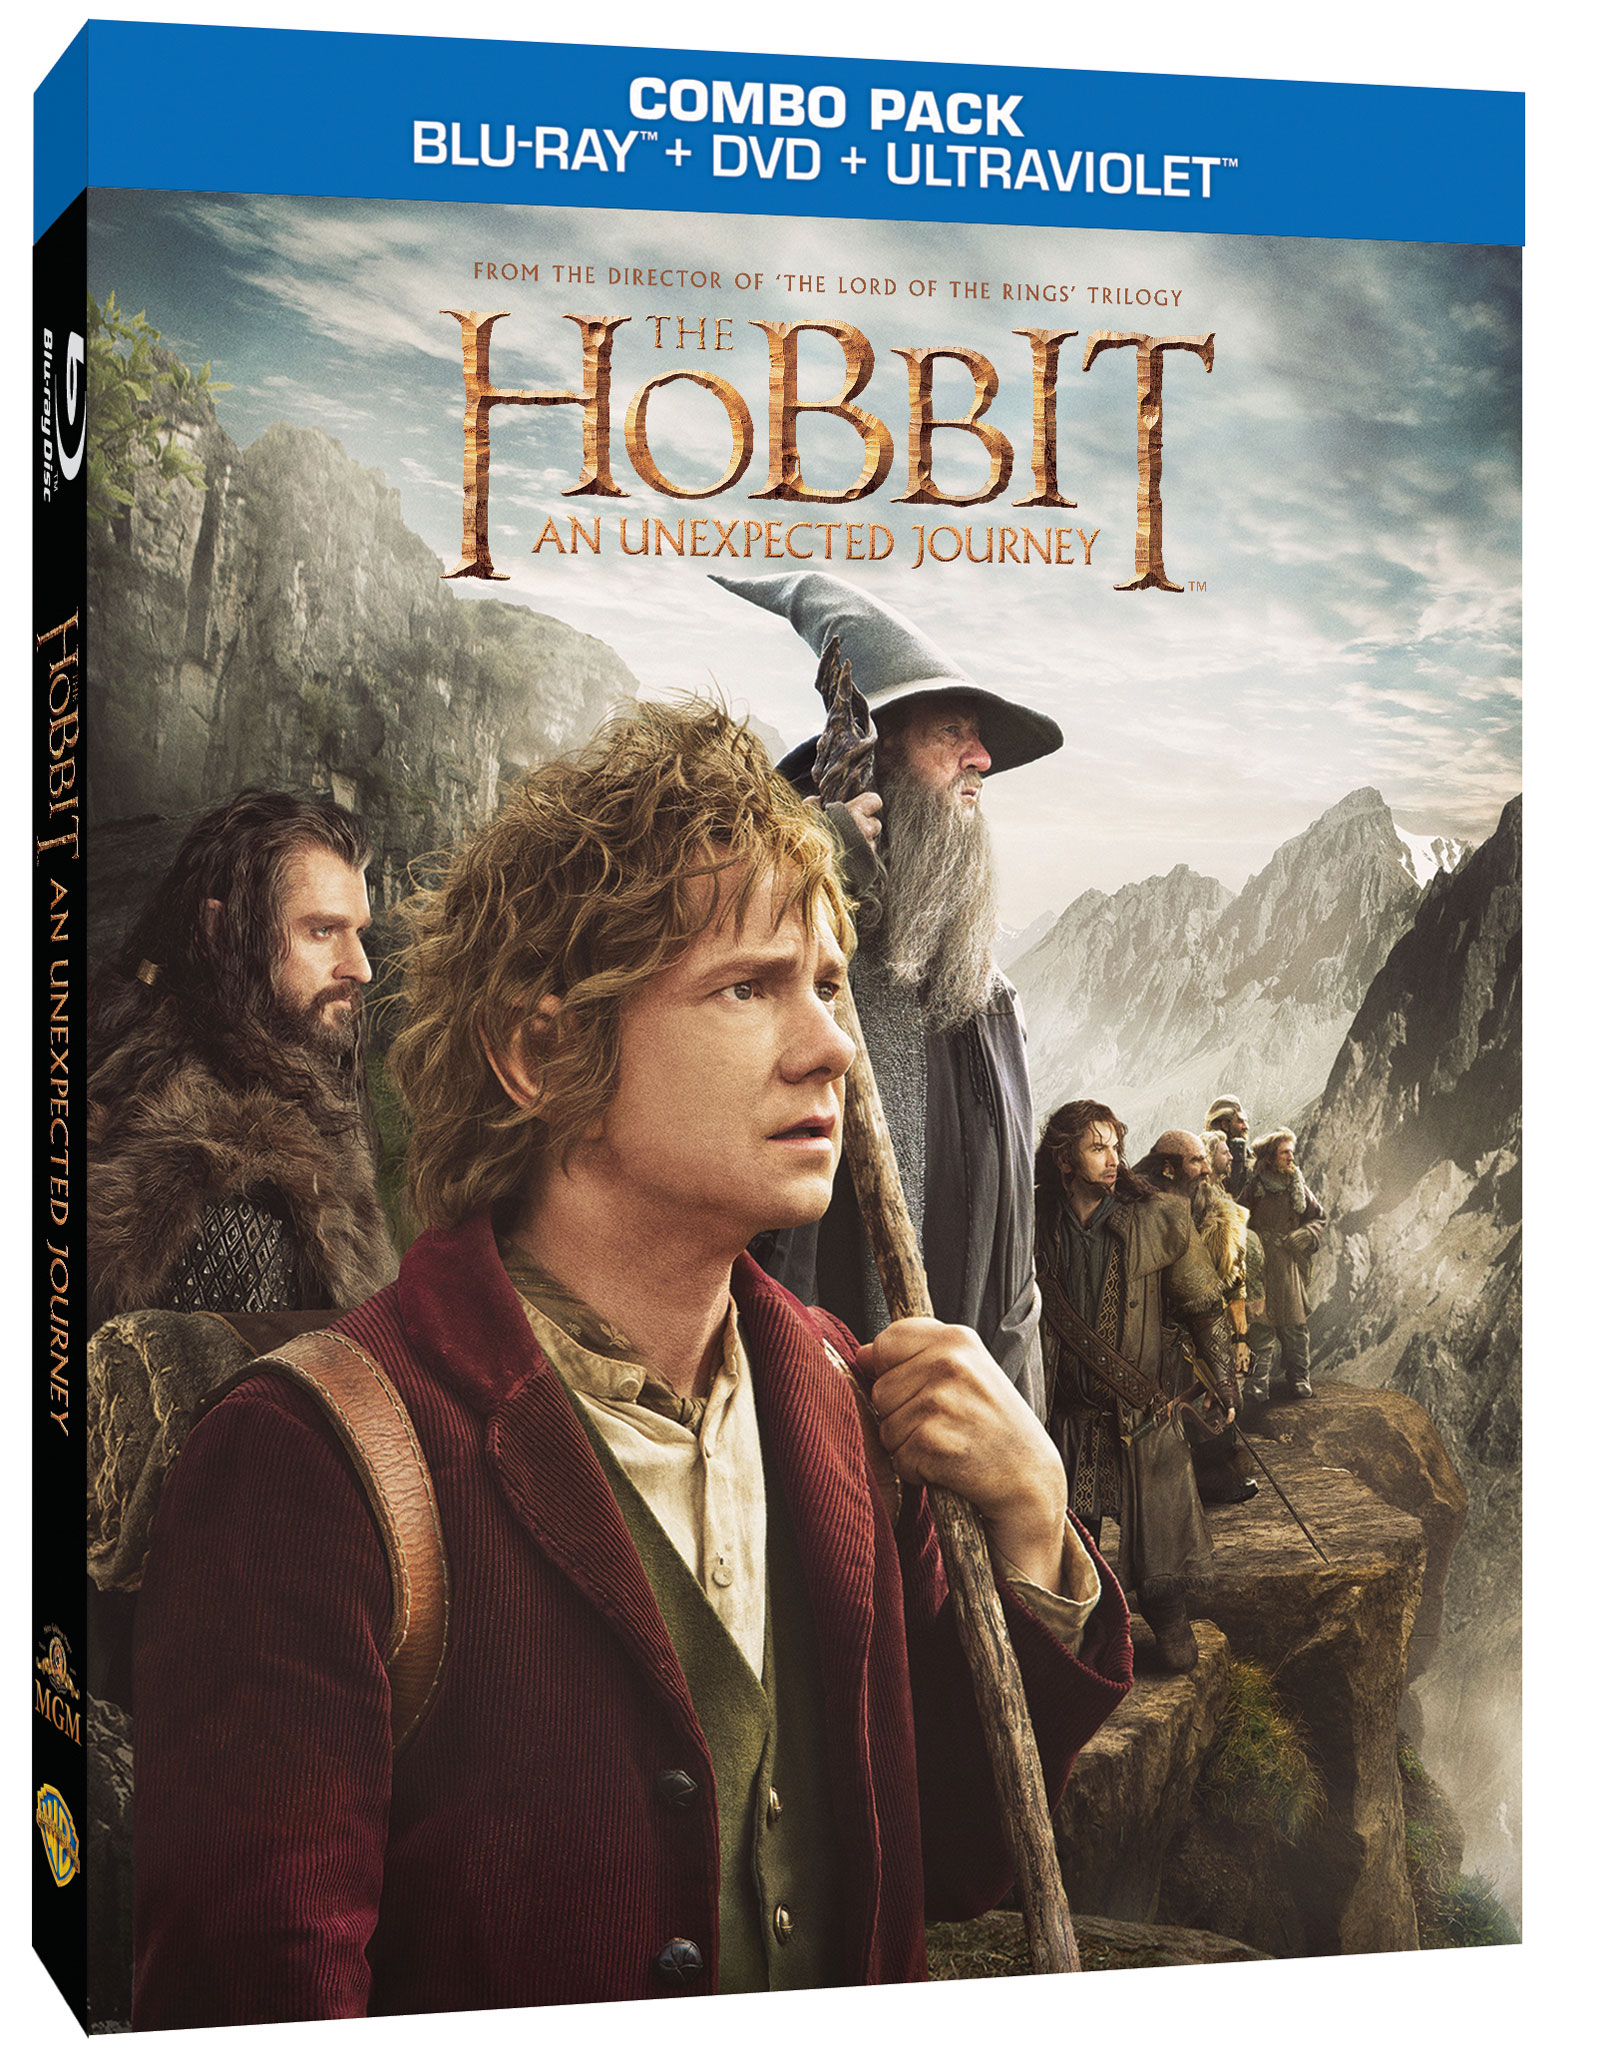 Own The Hobbit: An Unexpected Journey on Blu-ray Combo Pack 3/19. Available  for early download in HD 3/12!